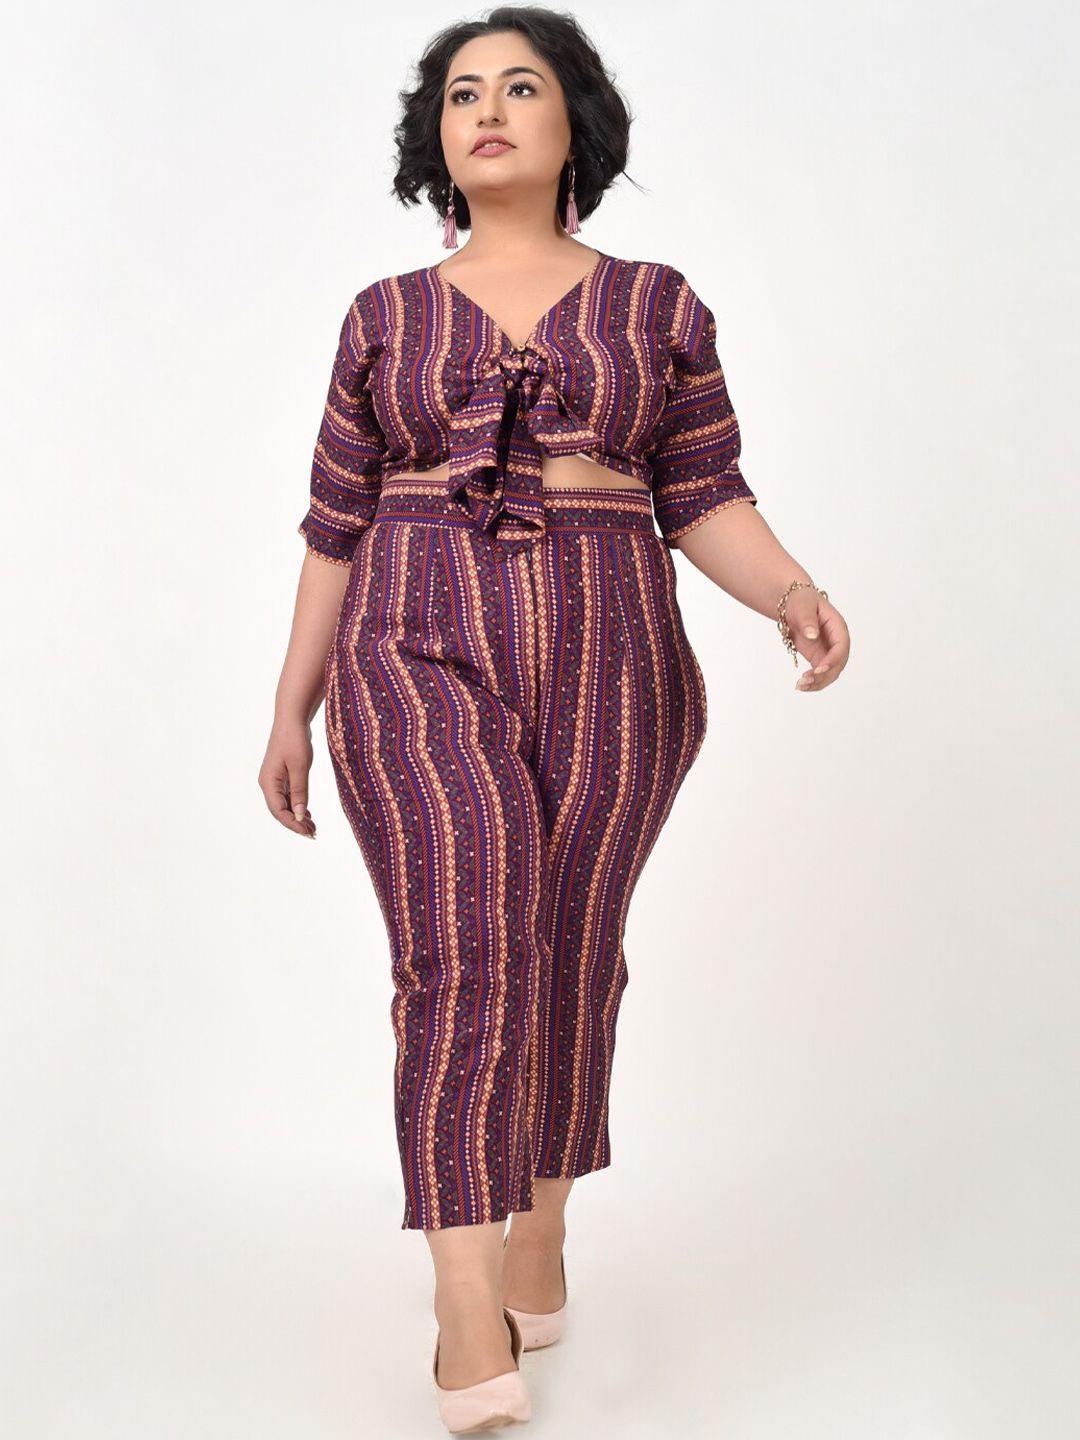 hencemade plus size women maroon & peach printed co-ords